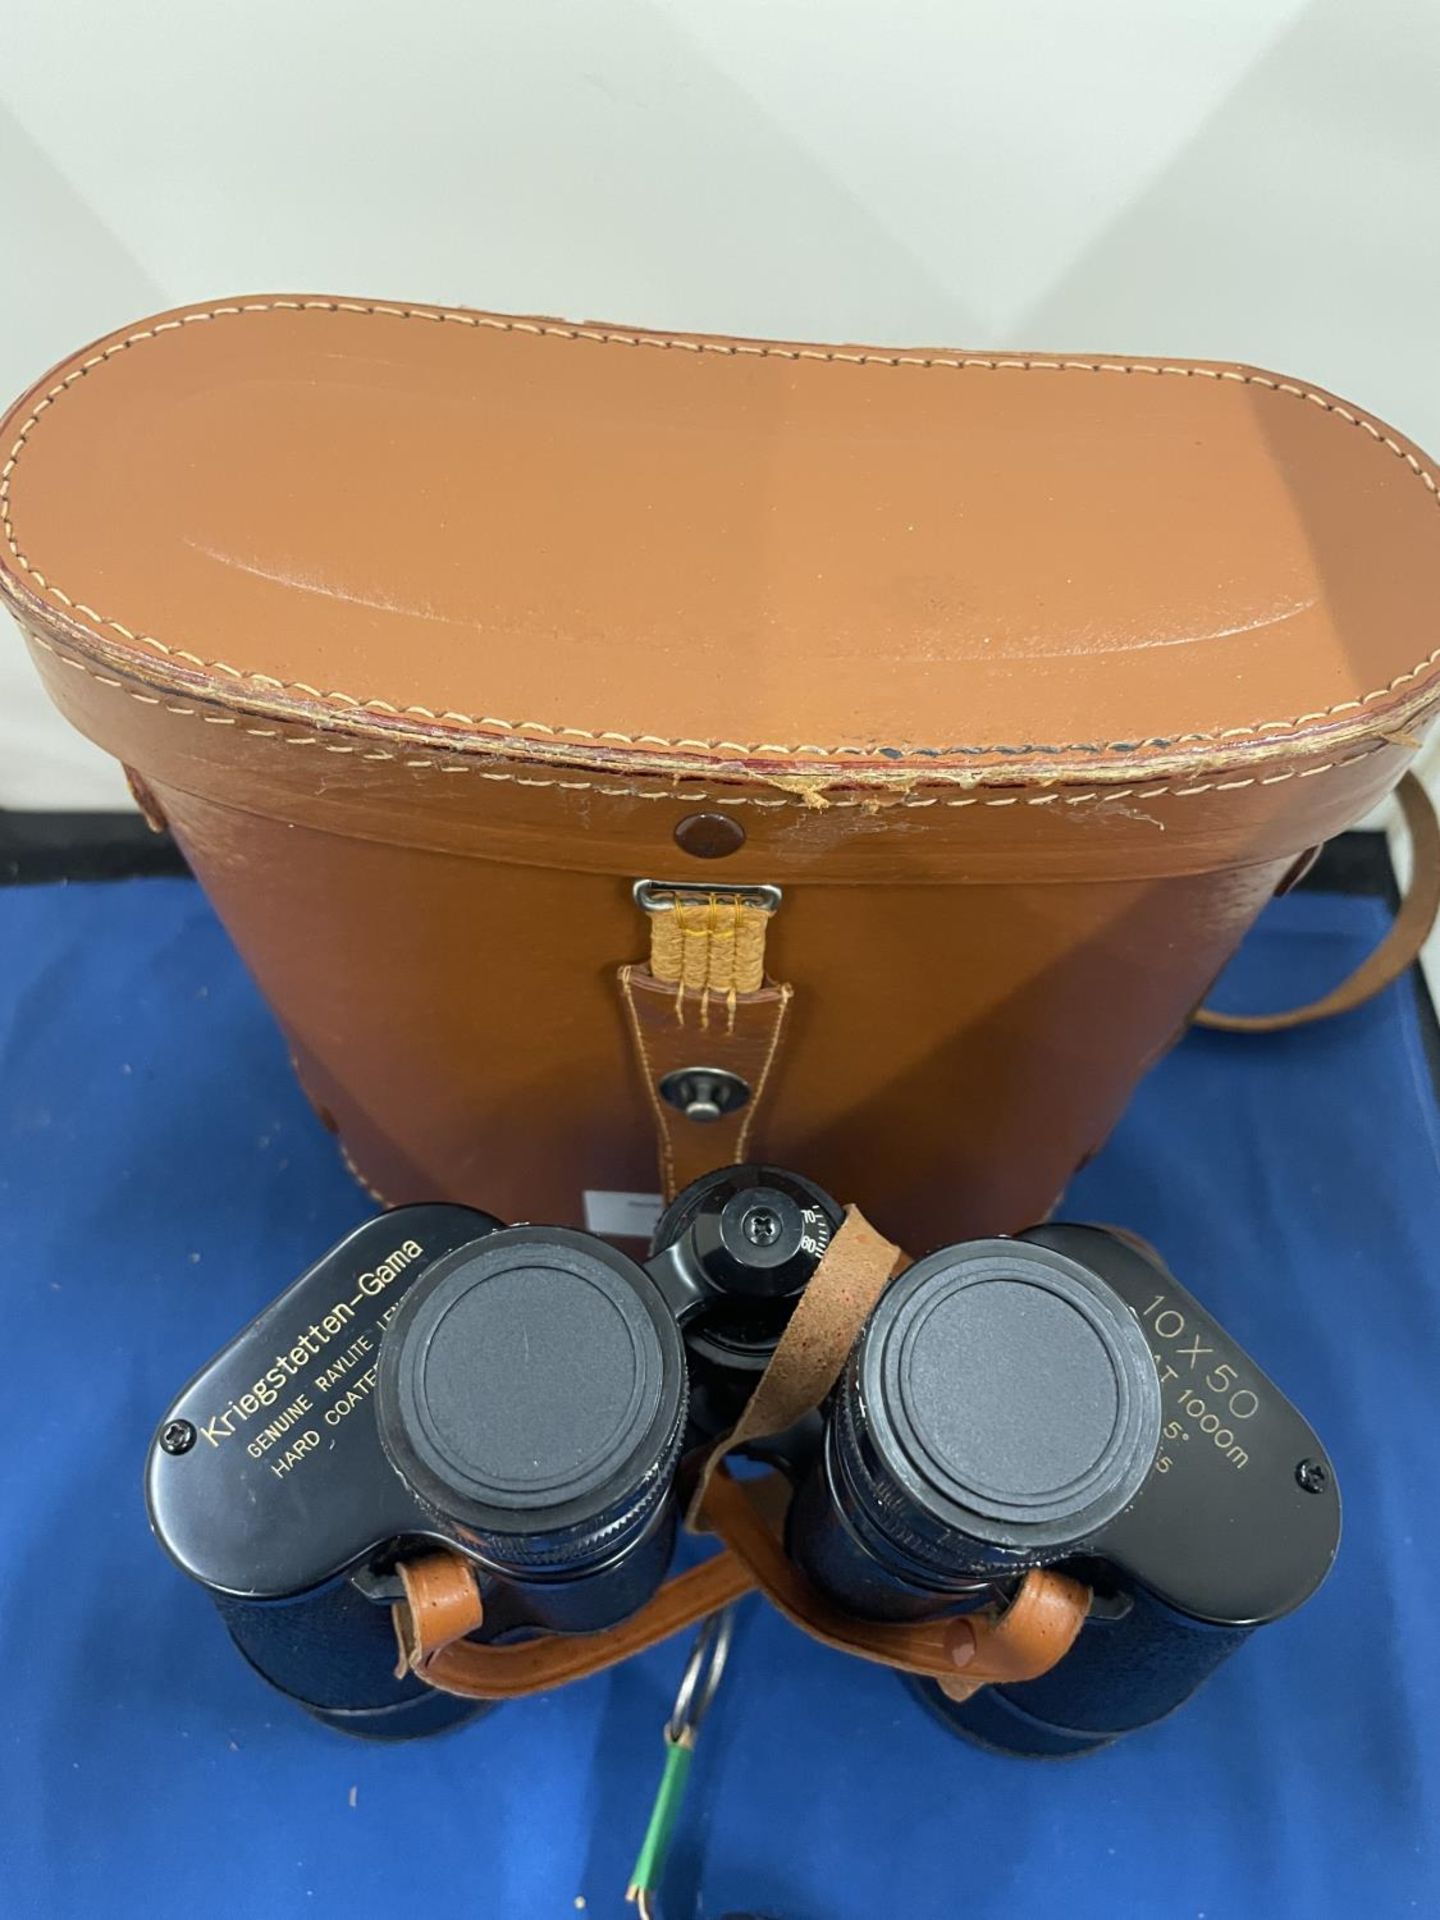 A PAIR OF KRIEGSTETTEN - GAMA BINOCULARS IN A LEATHER CASE WITH A VINTAGE LEATHER TAPE MEASURE - Image 3 of 8